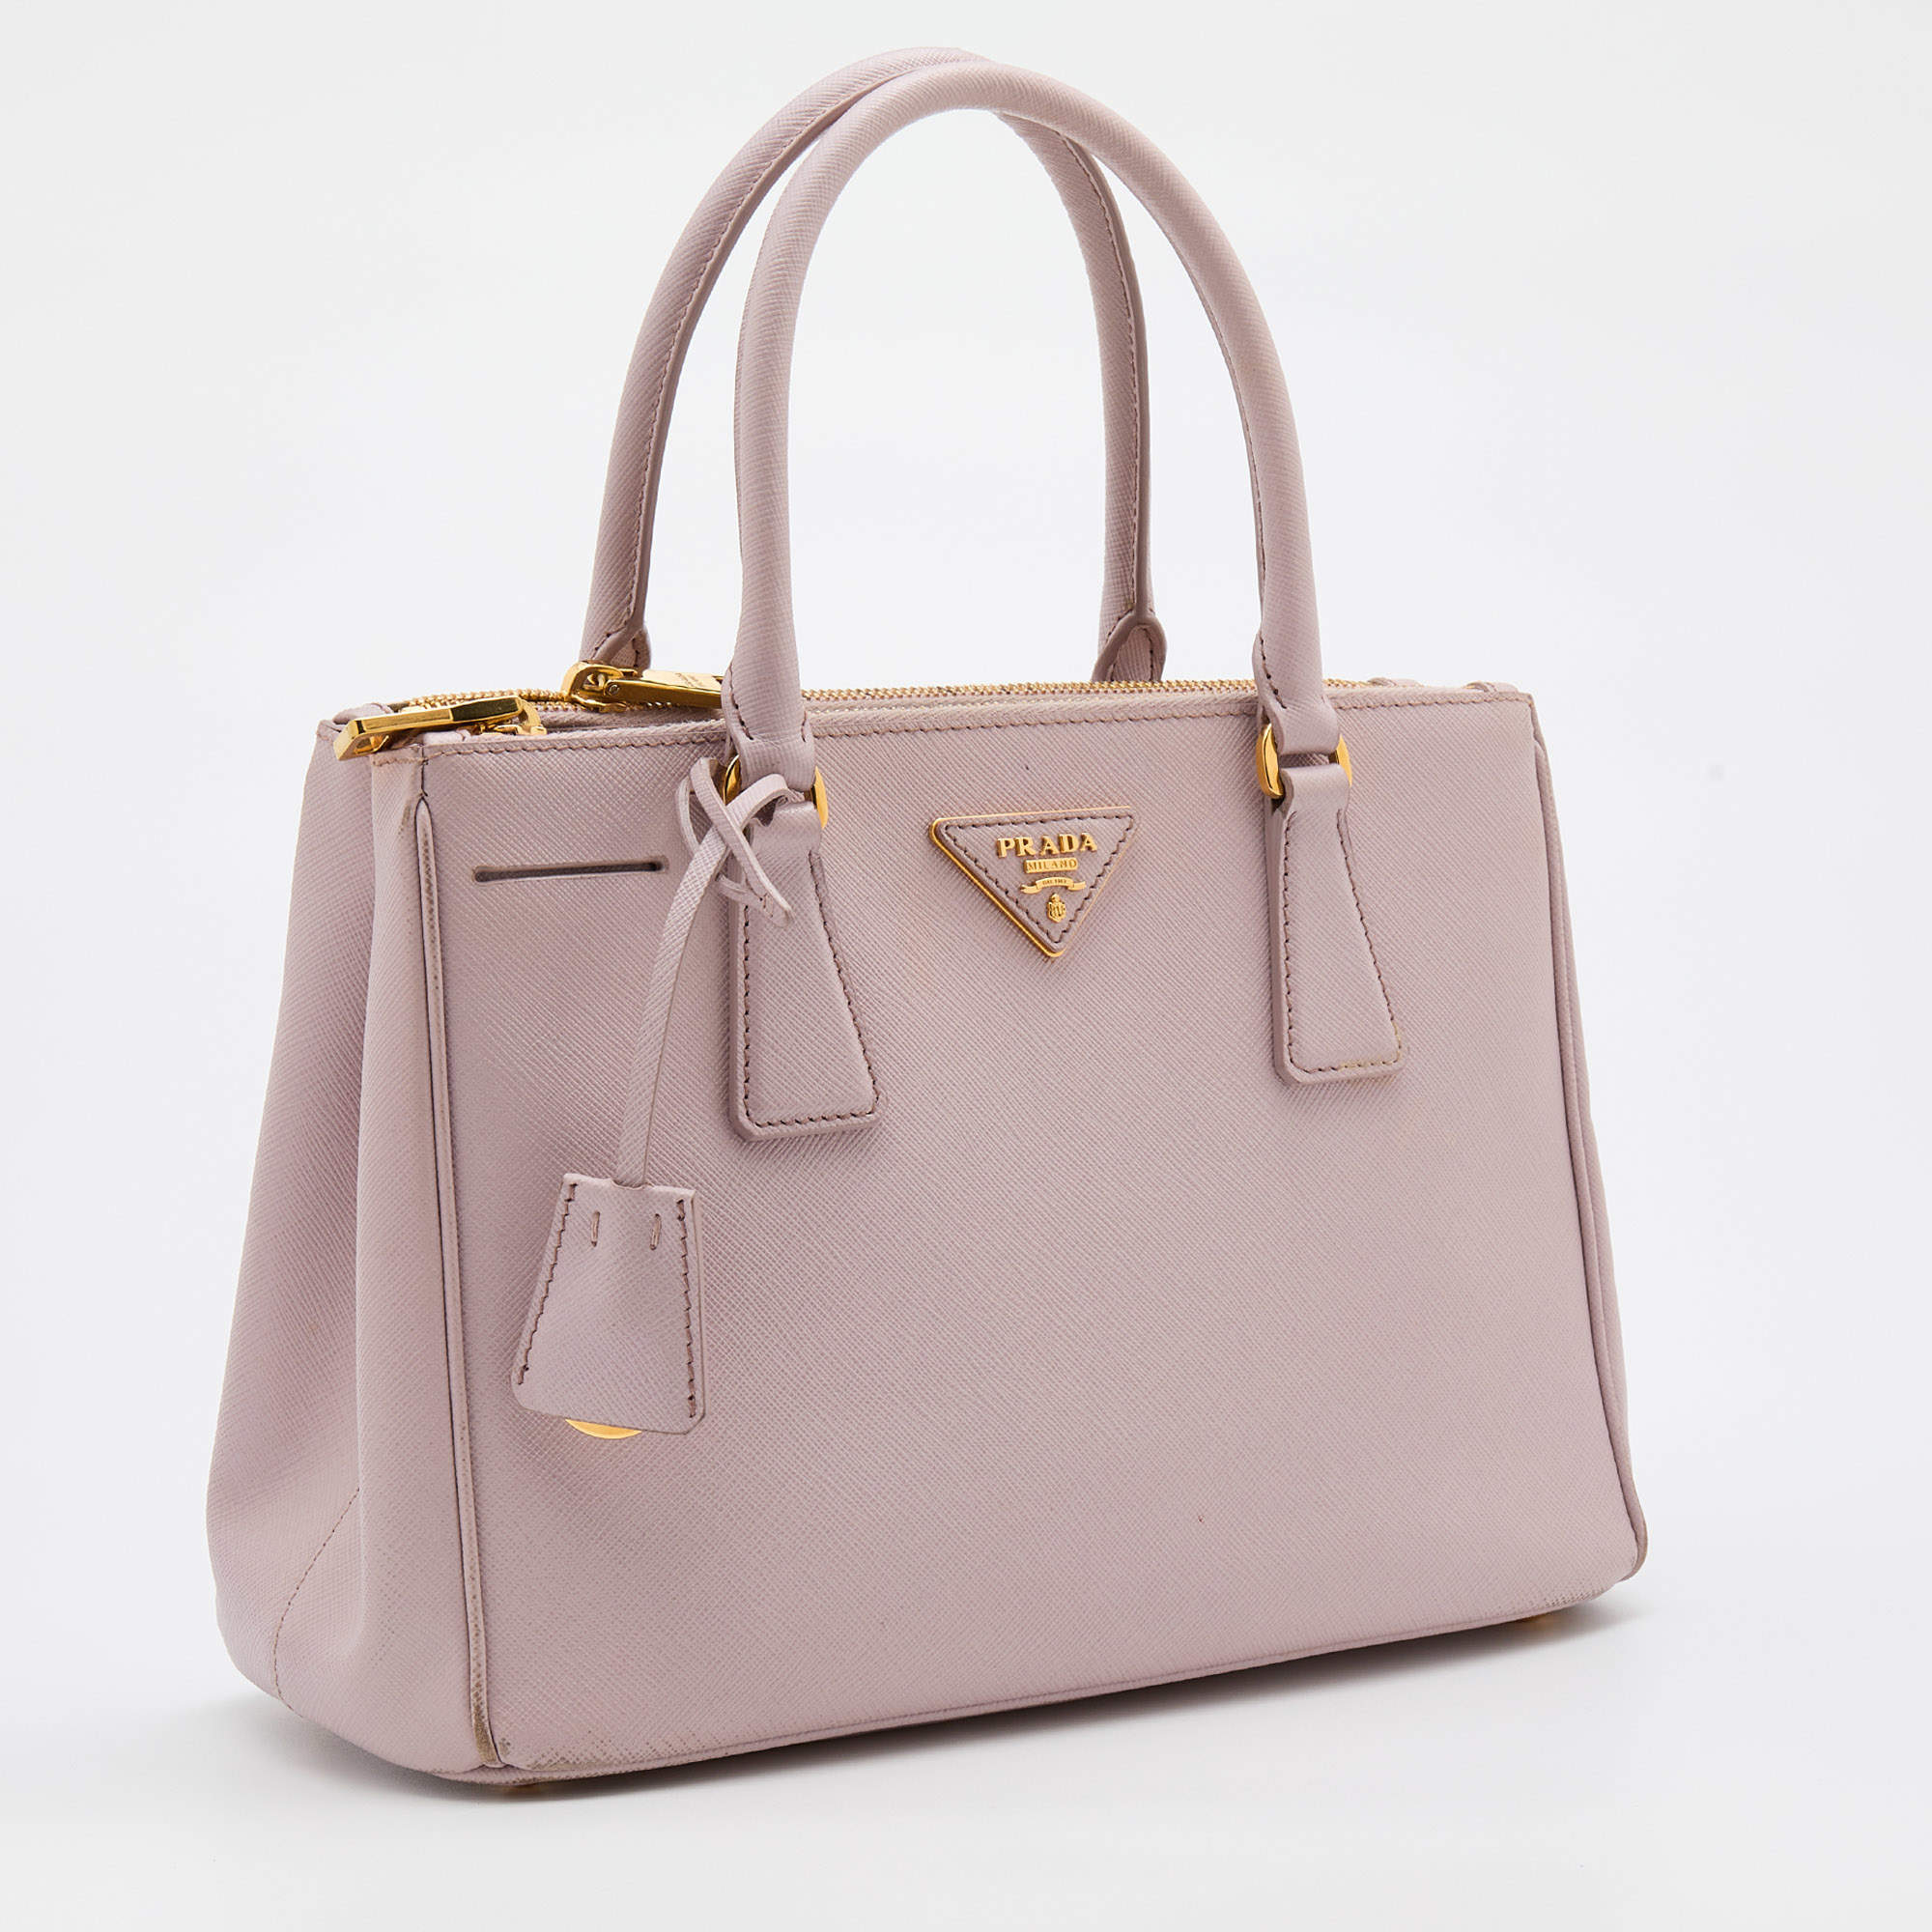 Prada Light Pink Saffiano Lux Leather Medium Double Zip Tote For